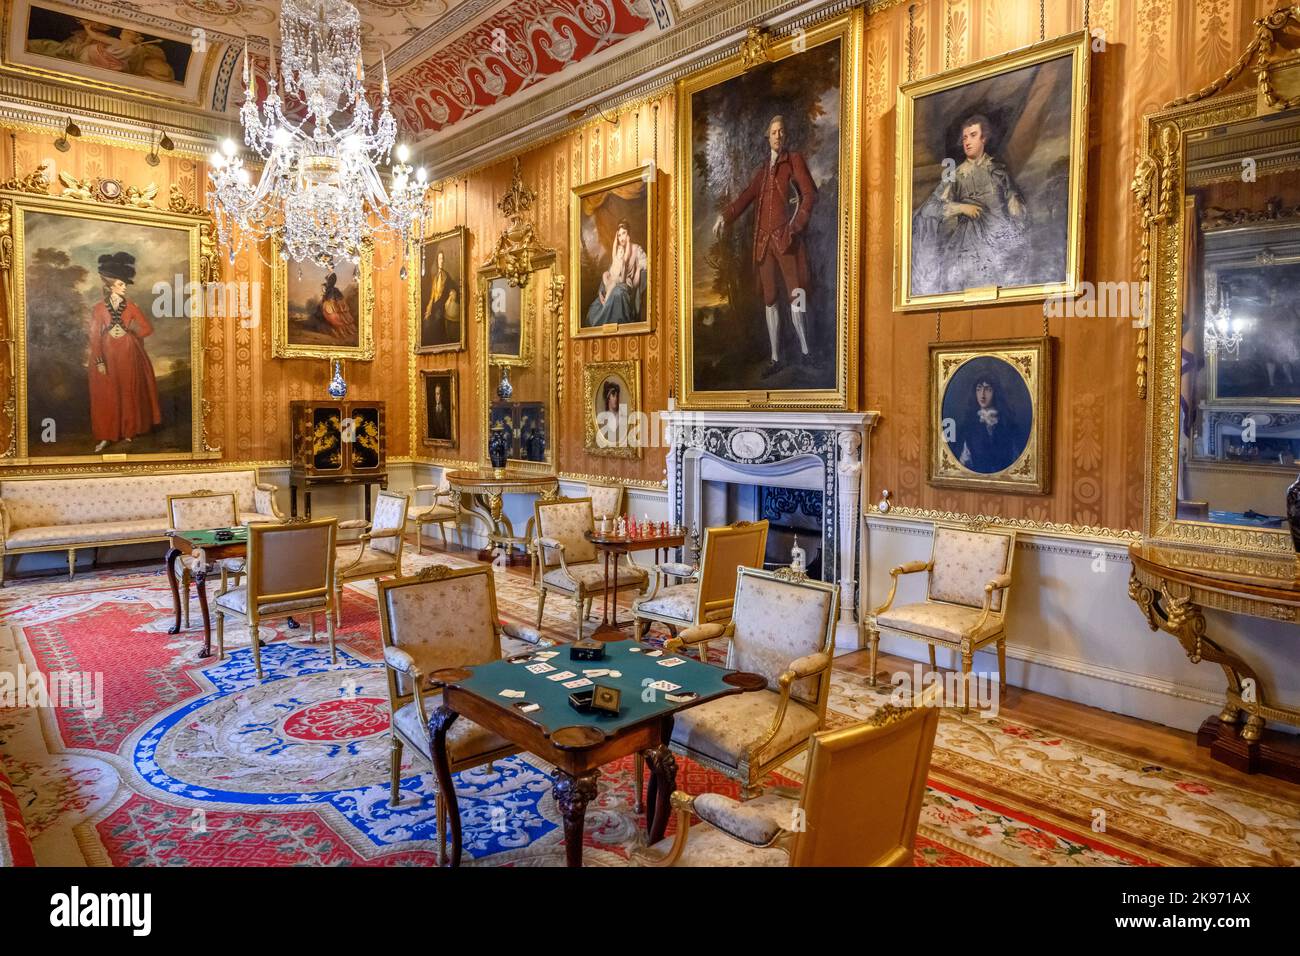 The Cinnamon Drawing Room, Harewood House, près de Leeds, West Yorkshire, Angleterre, ROYAUME-UNI Banque D'Images